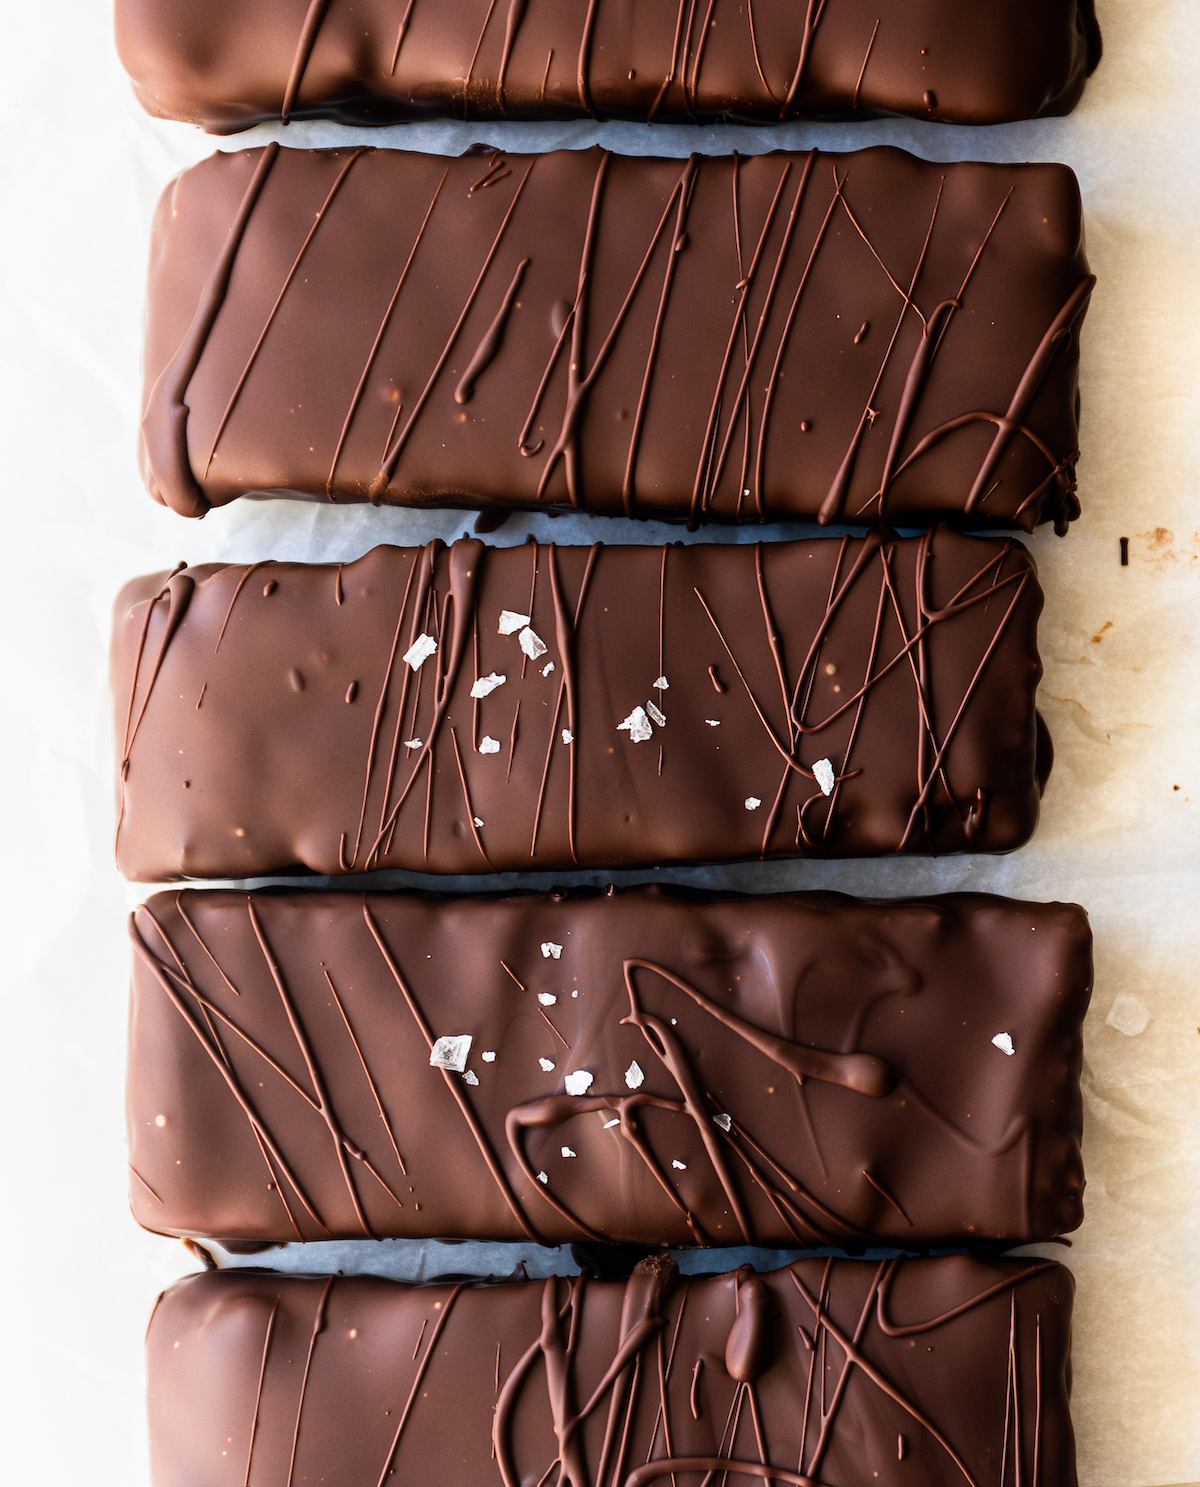 A close up of five bars covered in chocolate with sea salt sprinkled over the top.